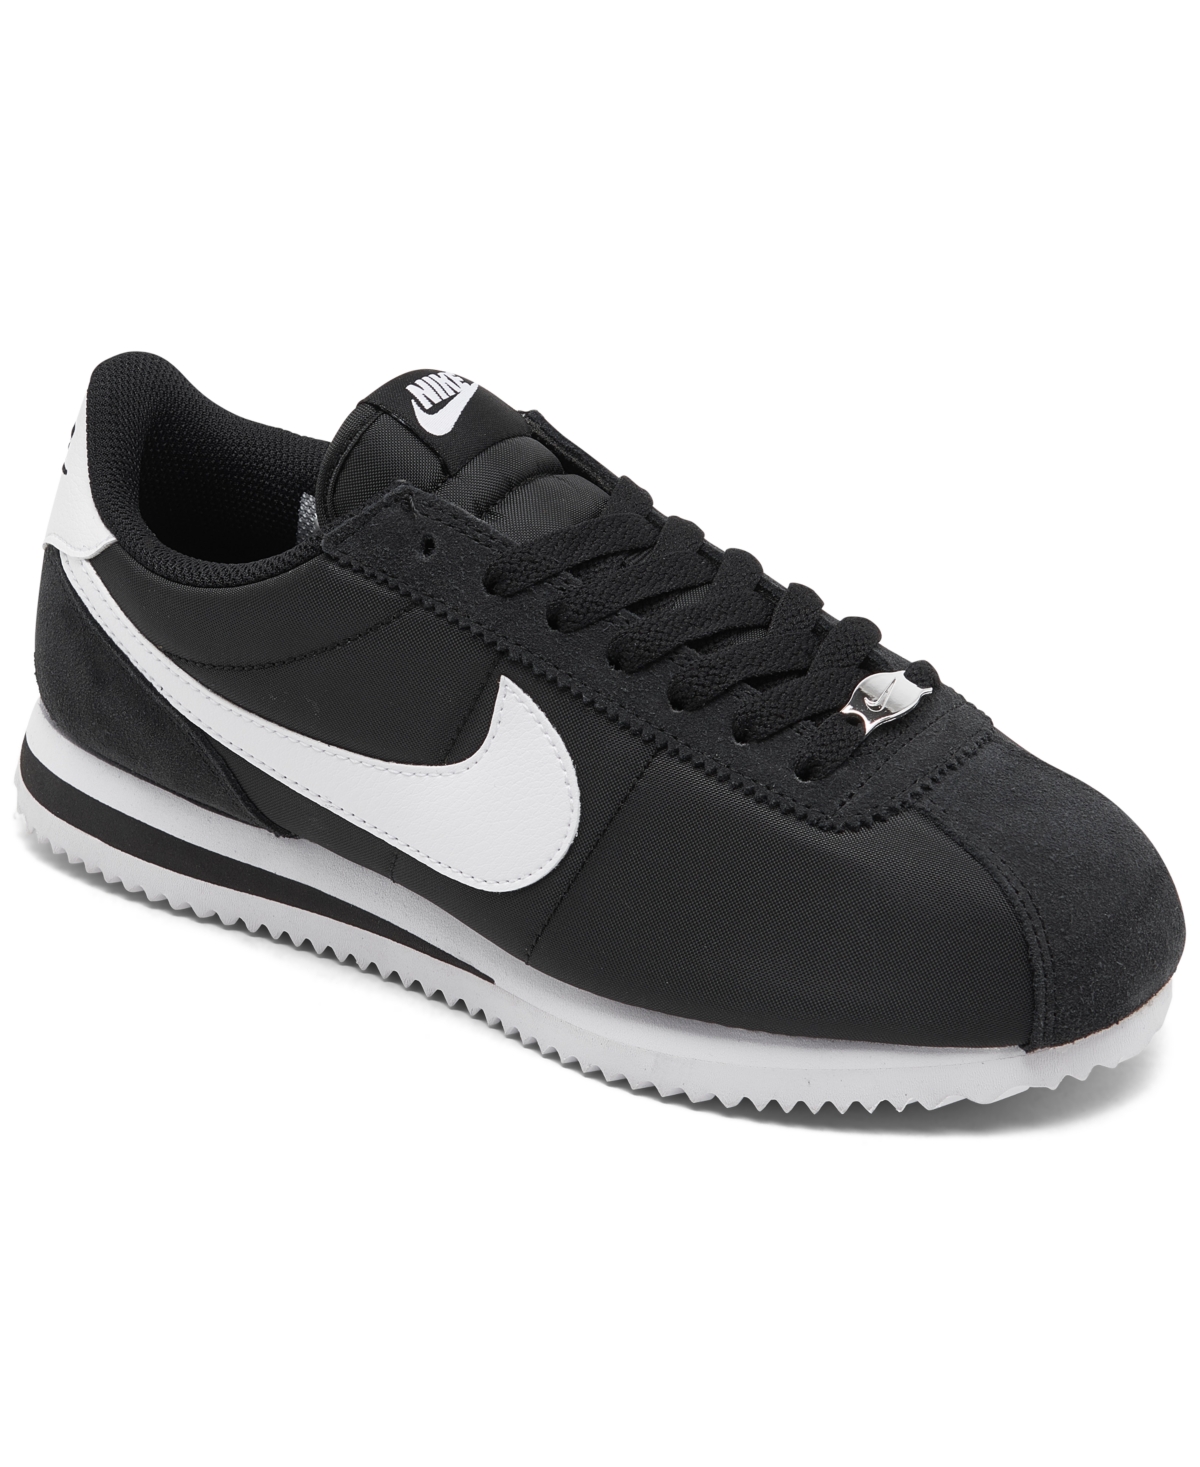 Women's Classic Cortez Nylon Casual Sneakers from Finish Line - Black/whit